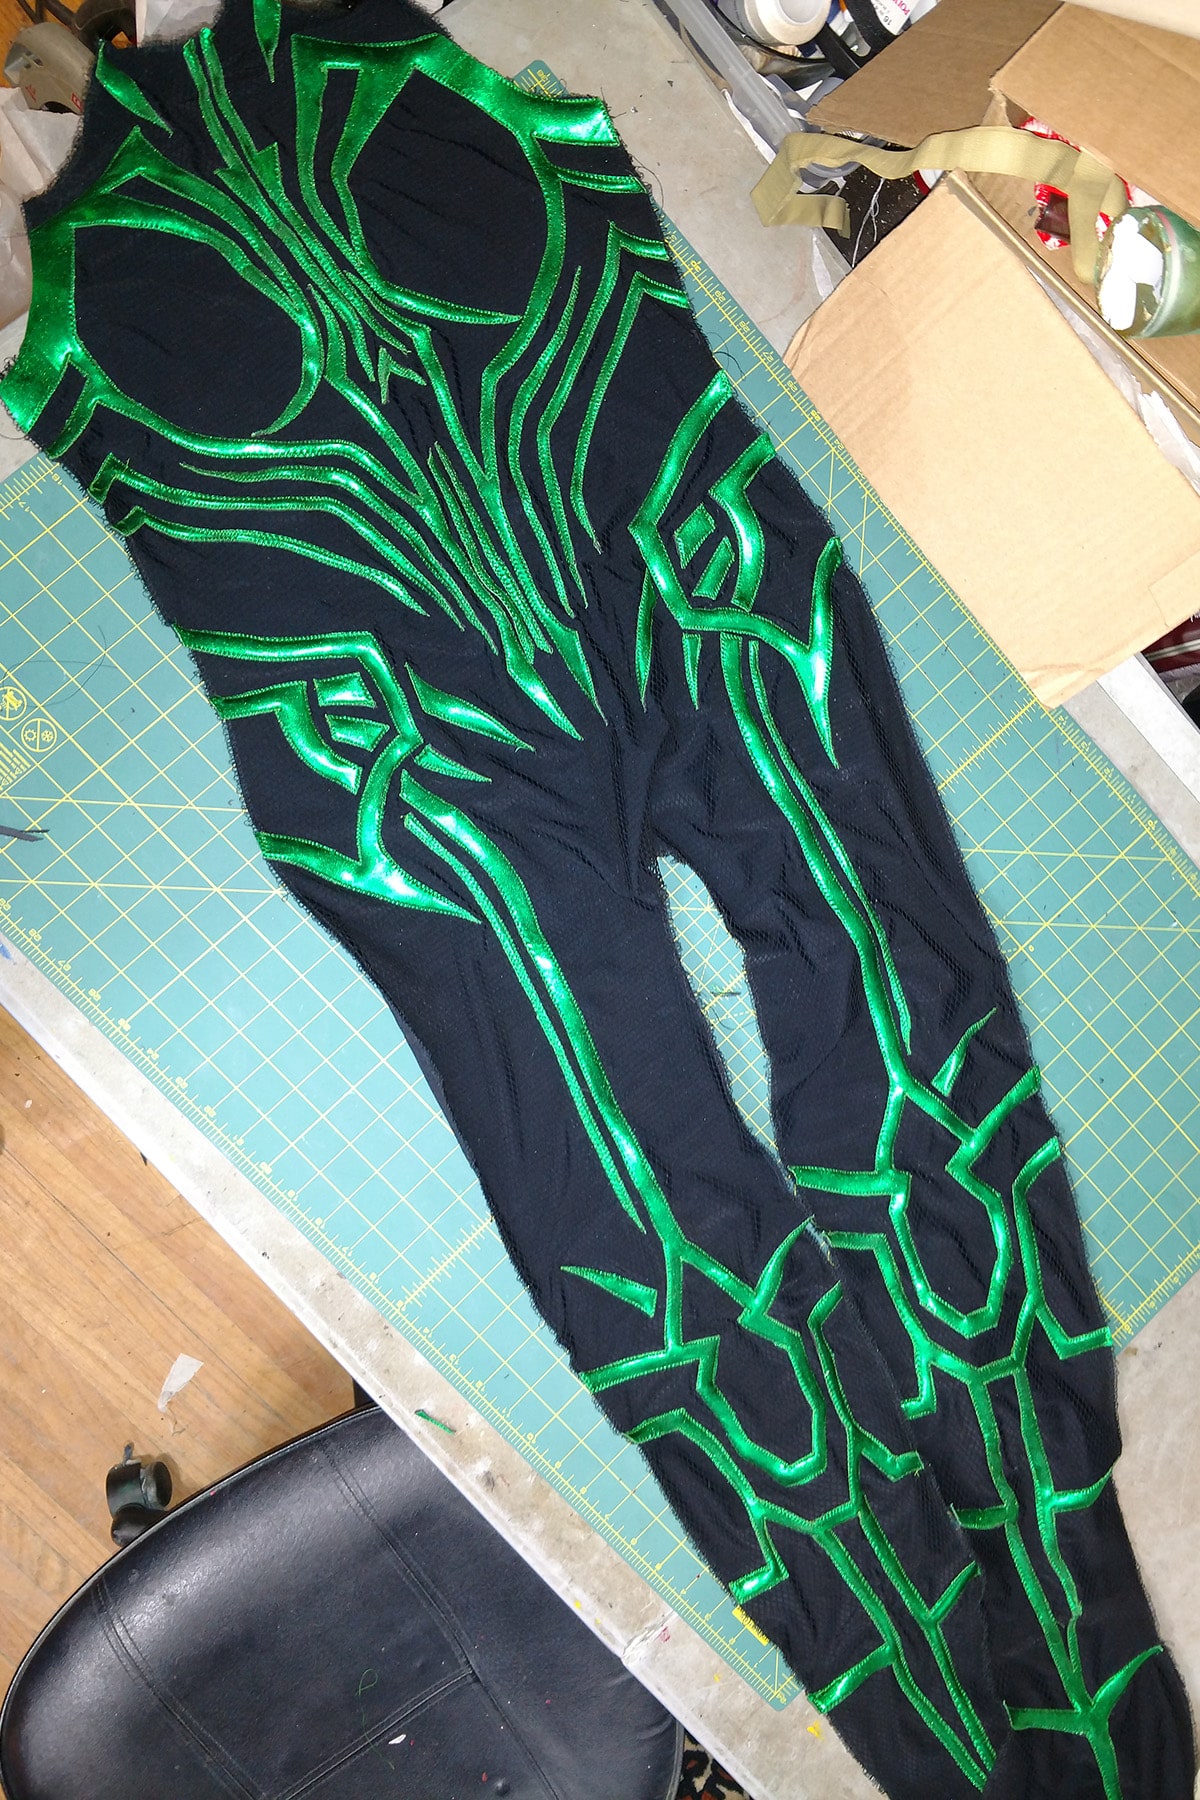 An intricate design of shiny green spandex, stitched down in place on a piece of textured black spandex - the whole front of the bodysuit.